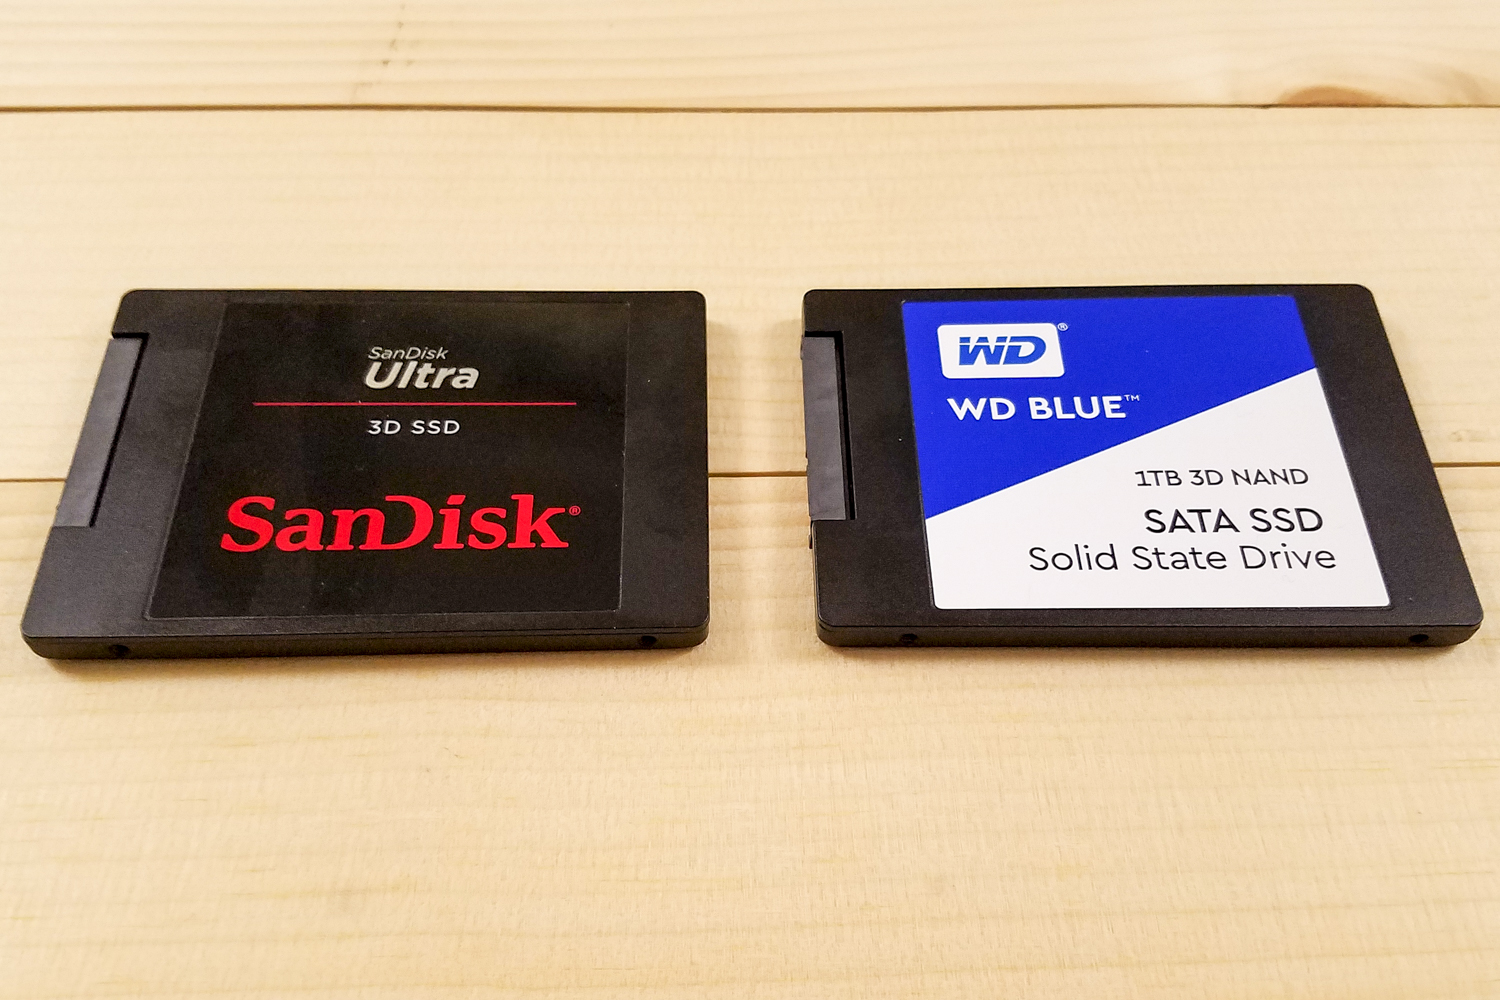 WD Blue 3D NAND SATA SSD and SanDisk Ultra 3D SSD sitting side-by-side aligned horizontally